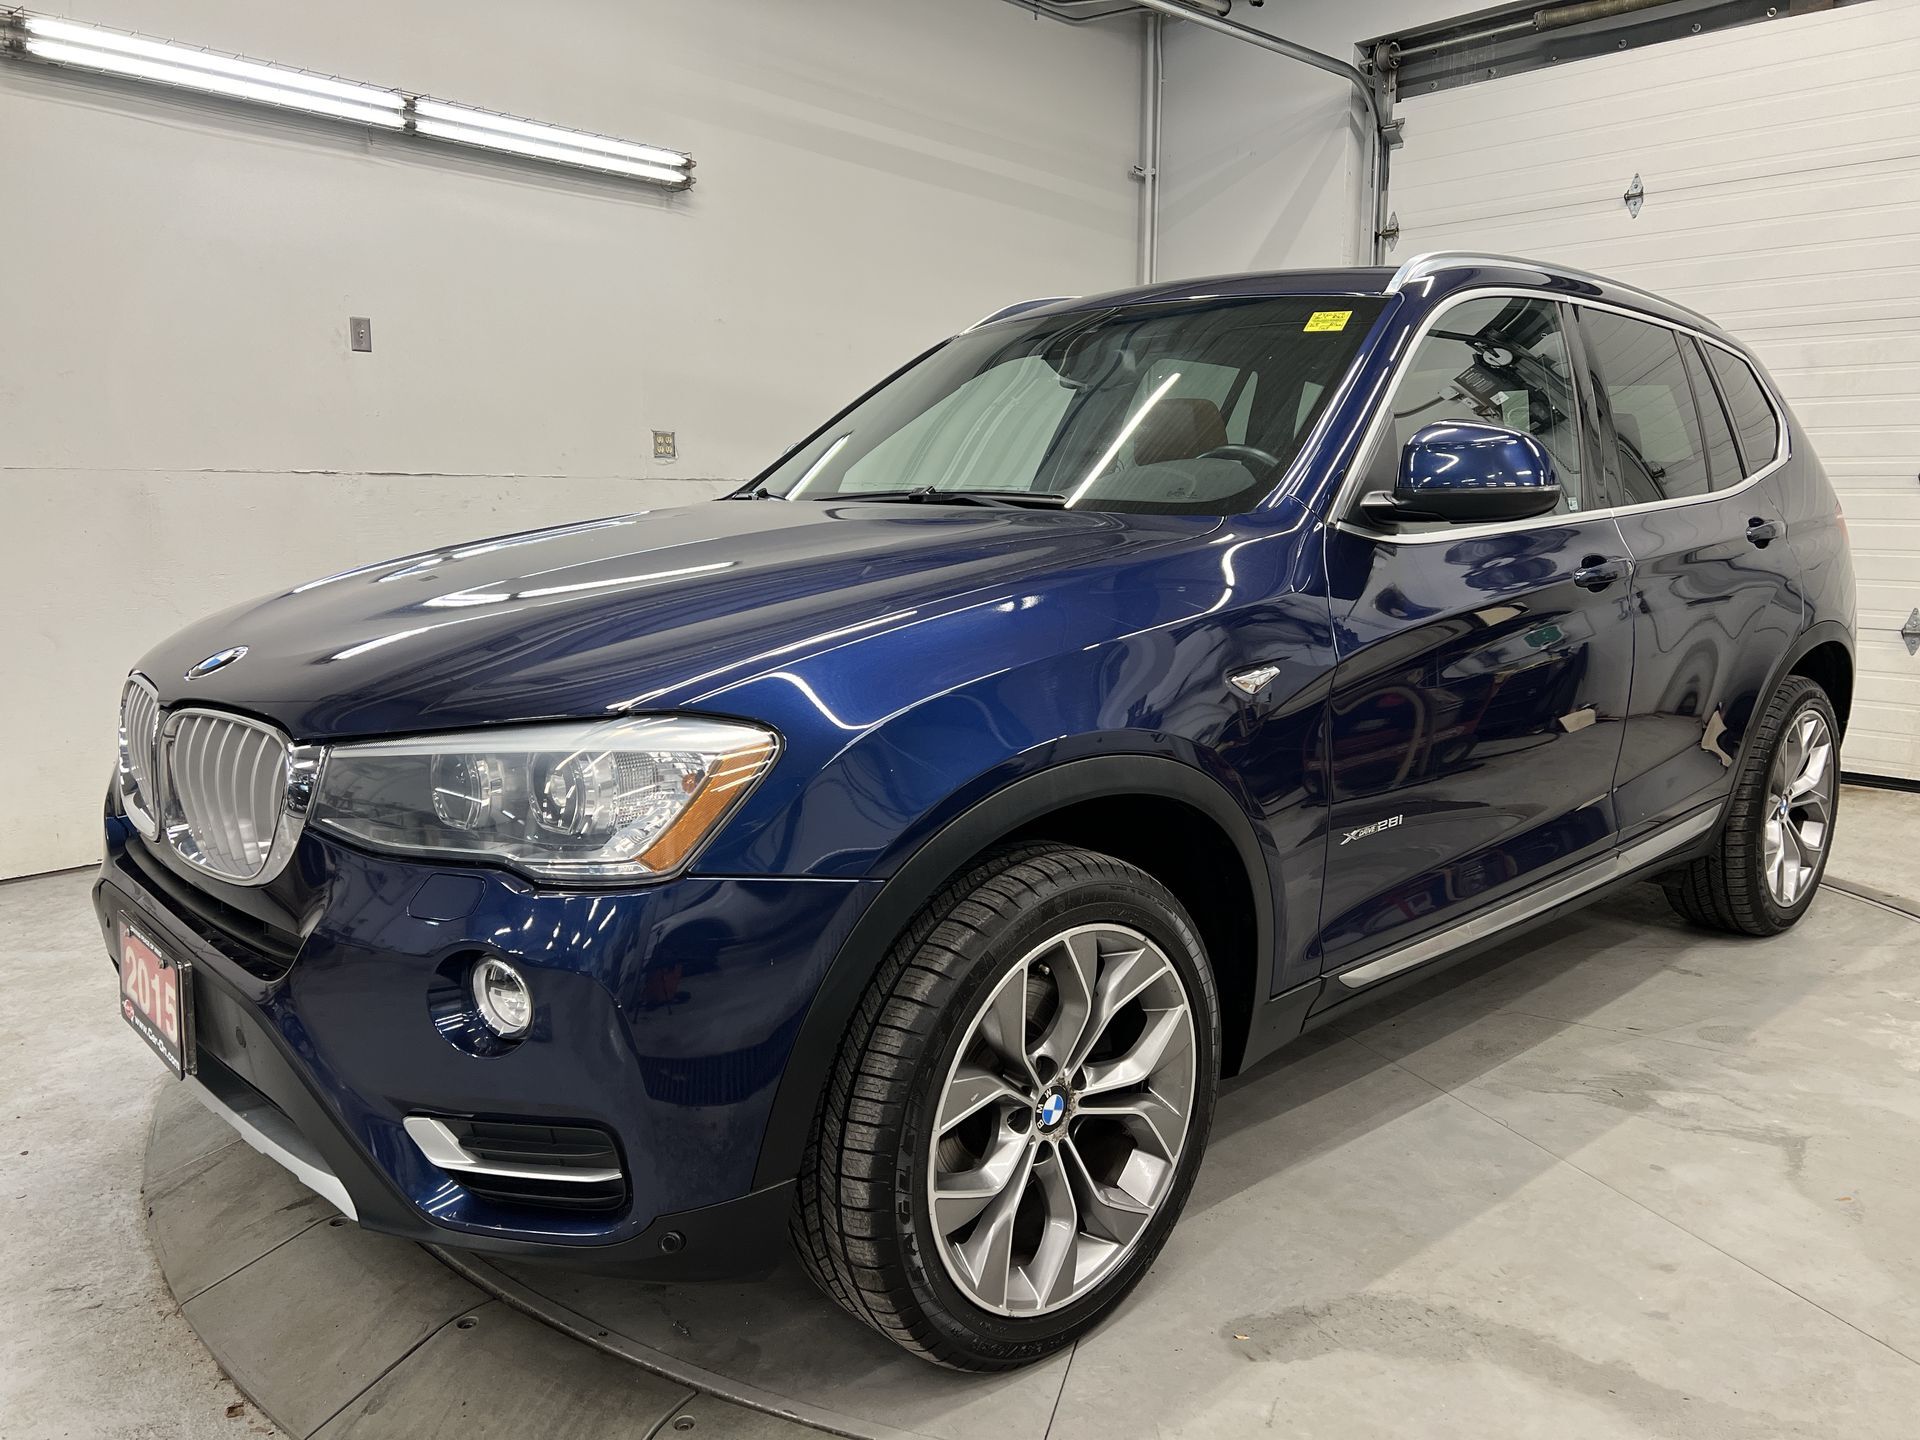 2015 BMW X3 PANO ROOF | NAV | BLIND SPOT | LOADED! | LOW KMS!